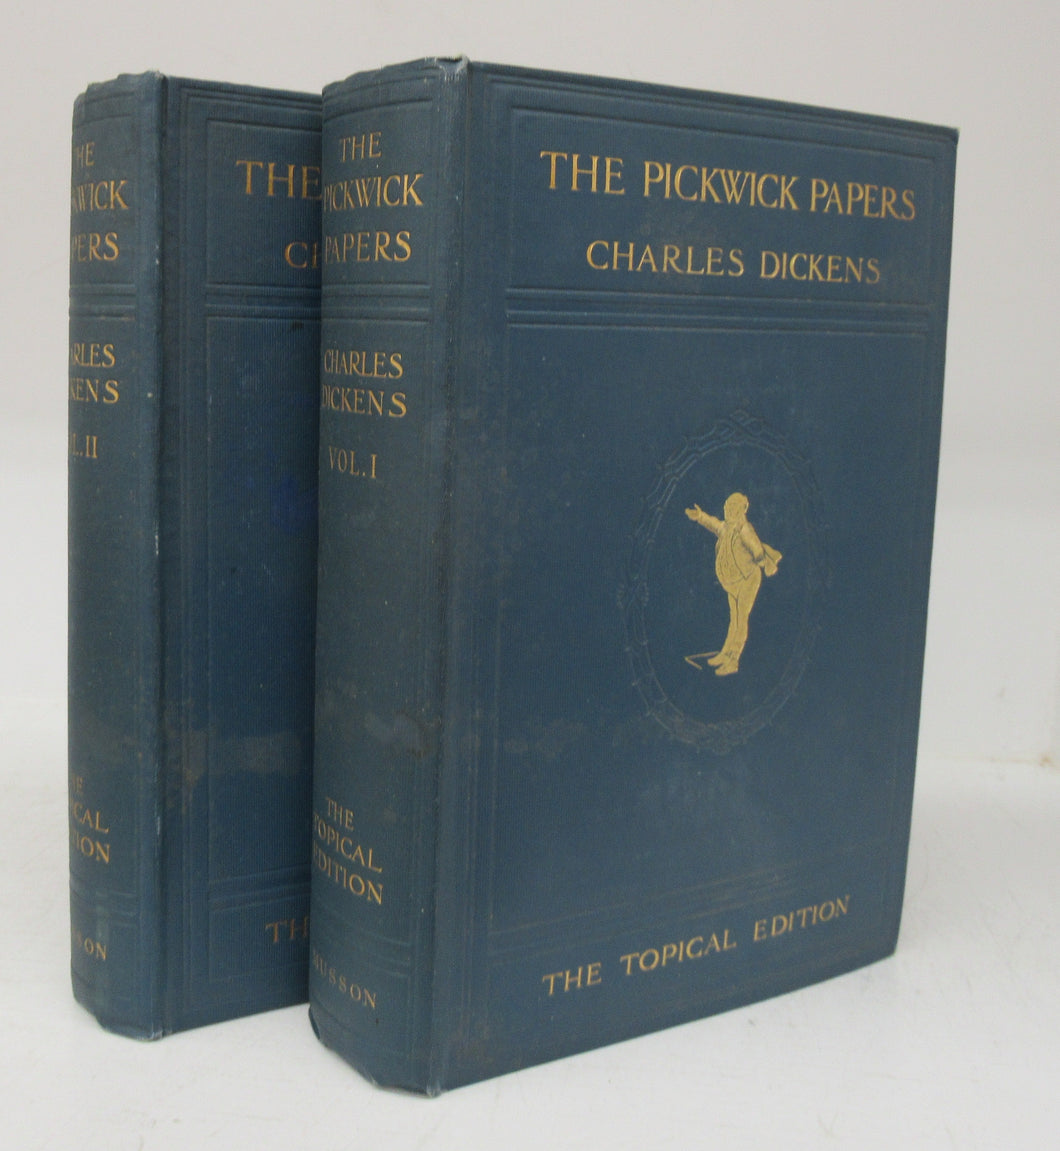 The Pickwick Papers (2 vols.)